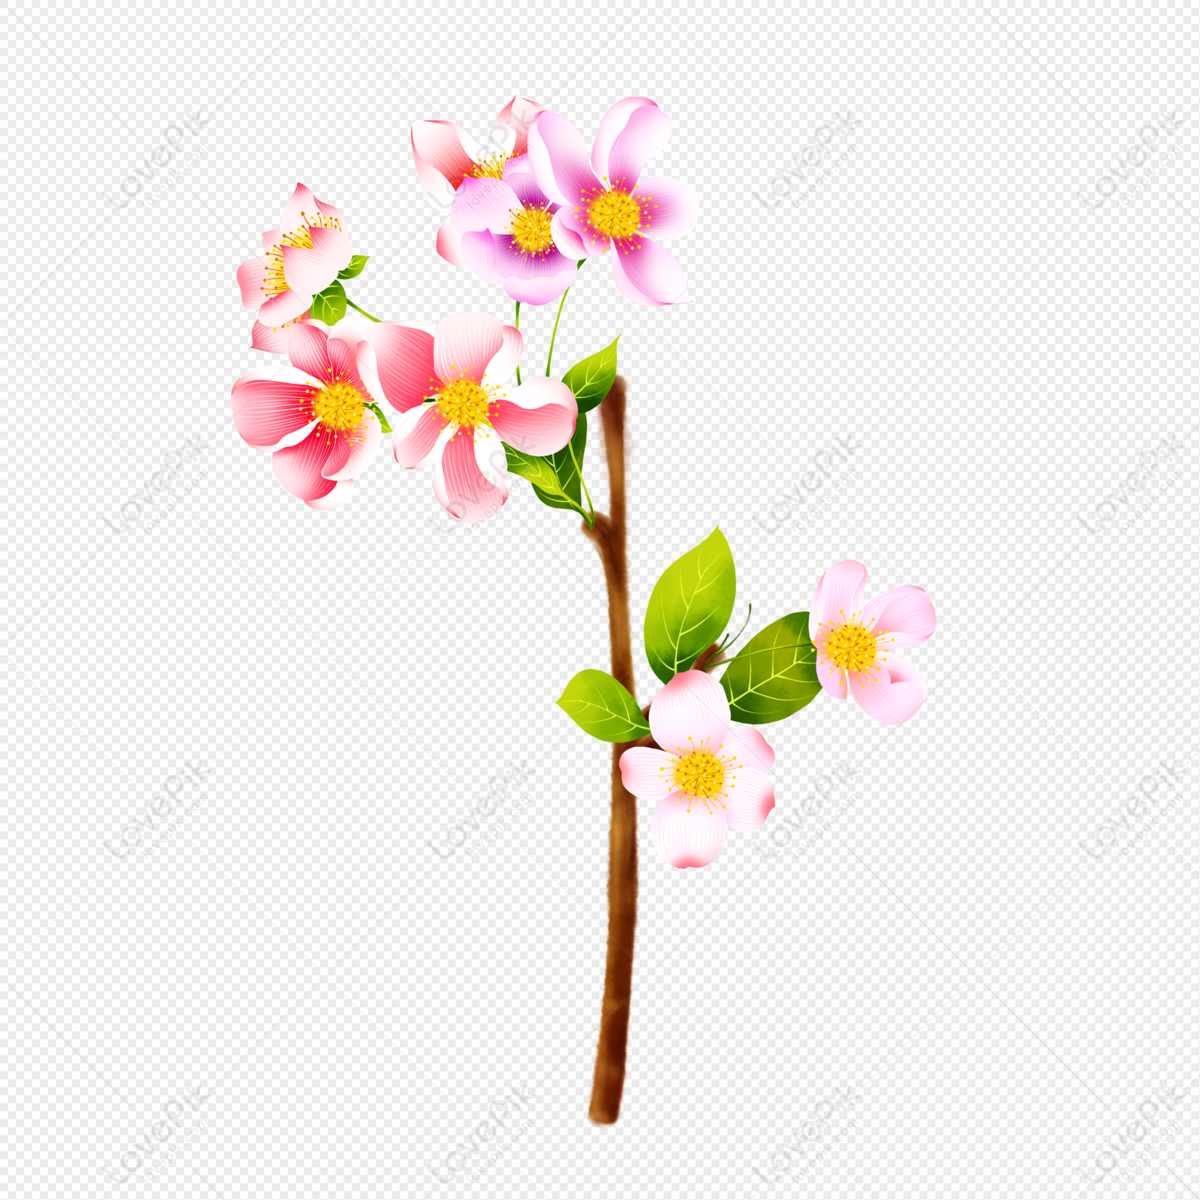 Peach Blossom PNG Images With Transparent Background | Free ...